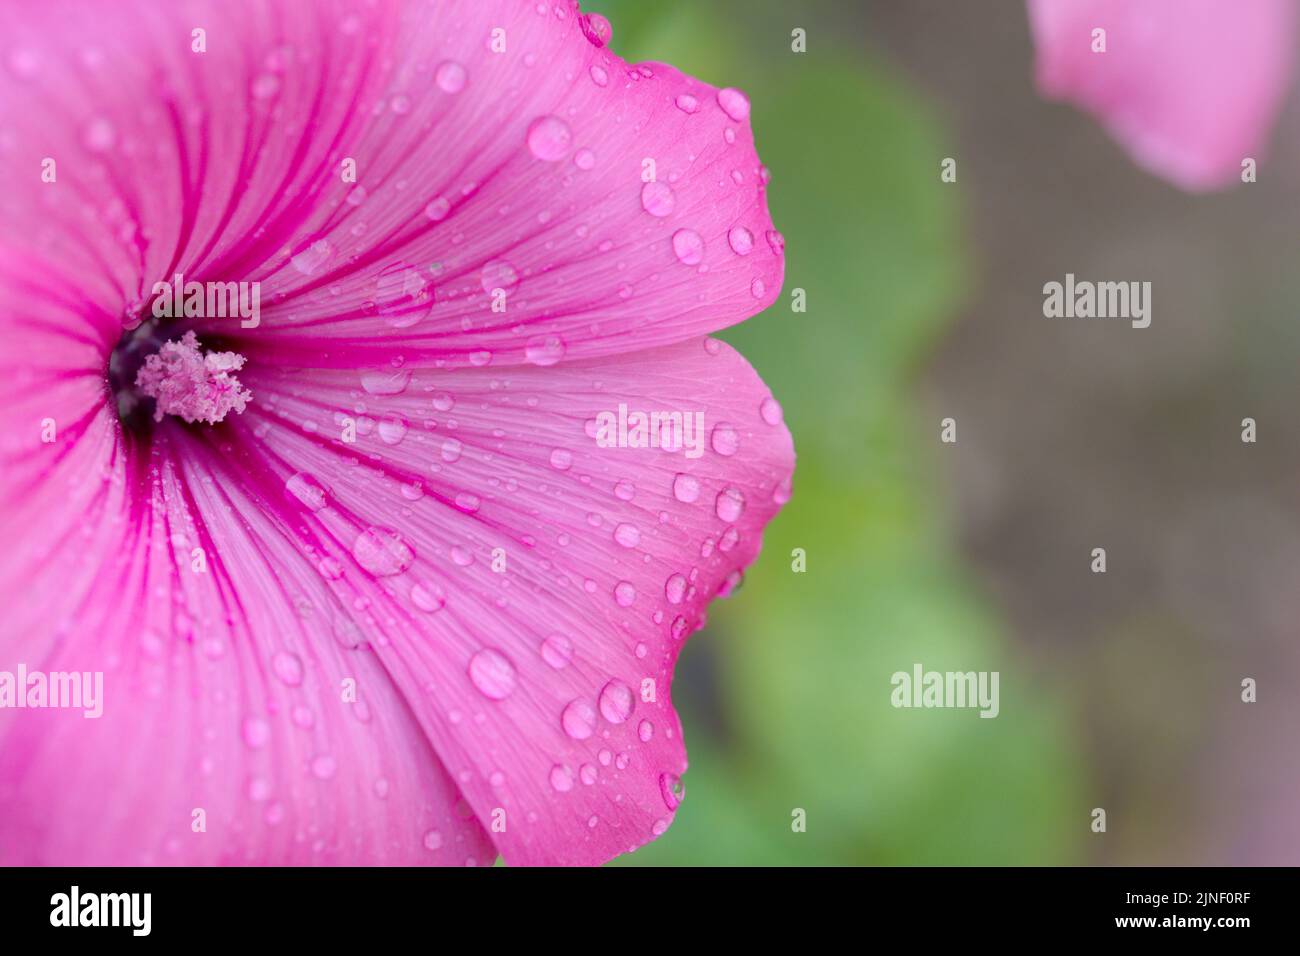 Macro photography of a pink malva with water drops Stock Photo